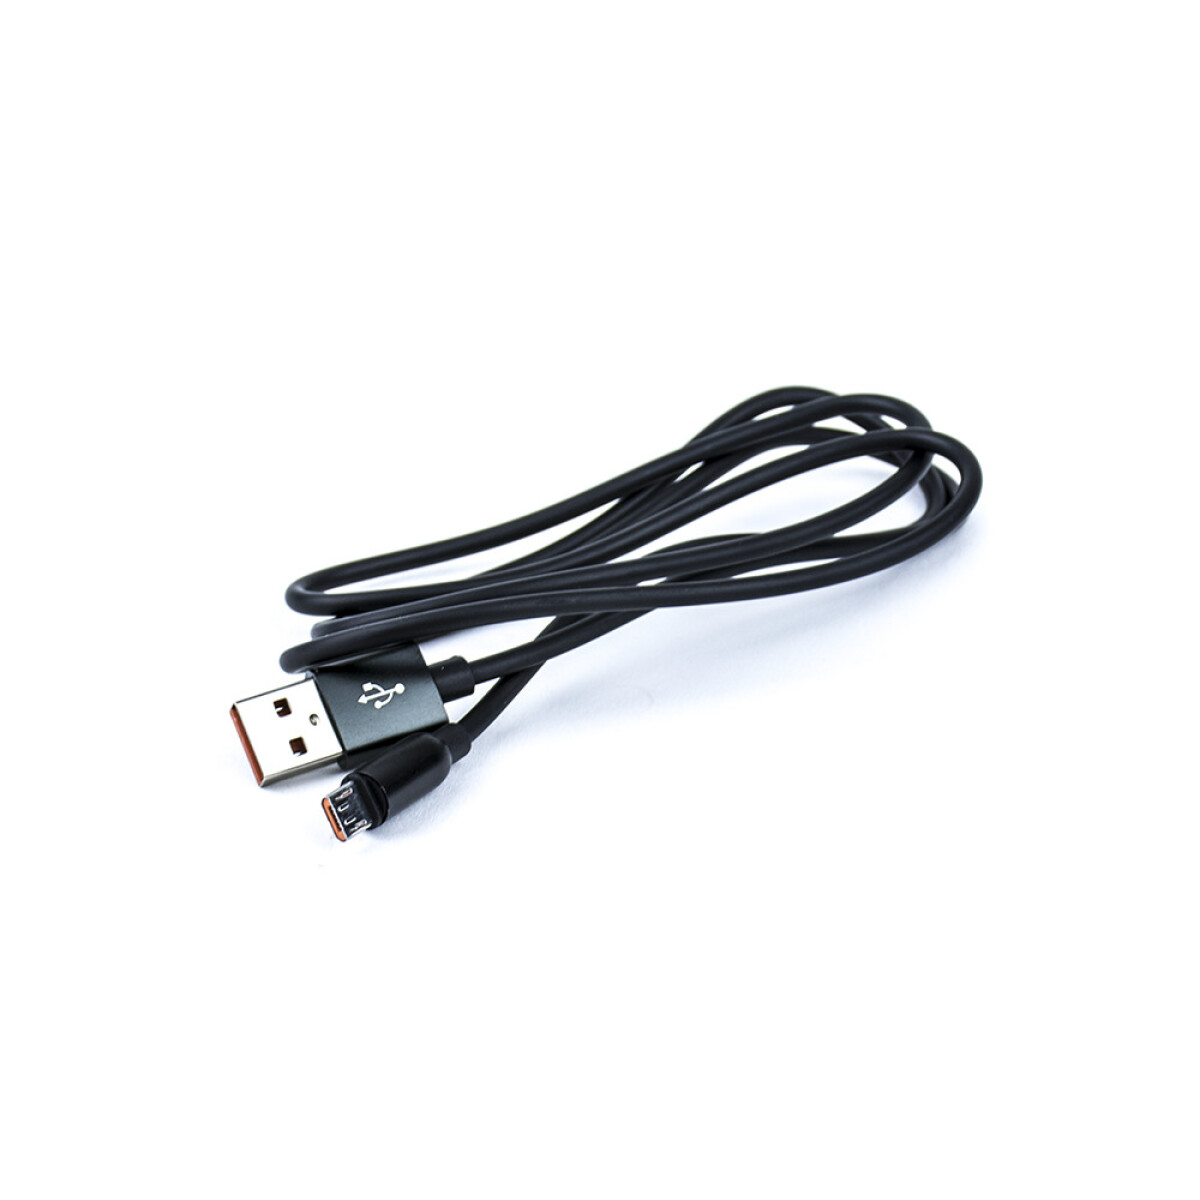 Cable Usb Android En Tubo - Negro 